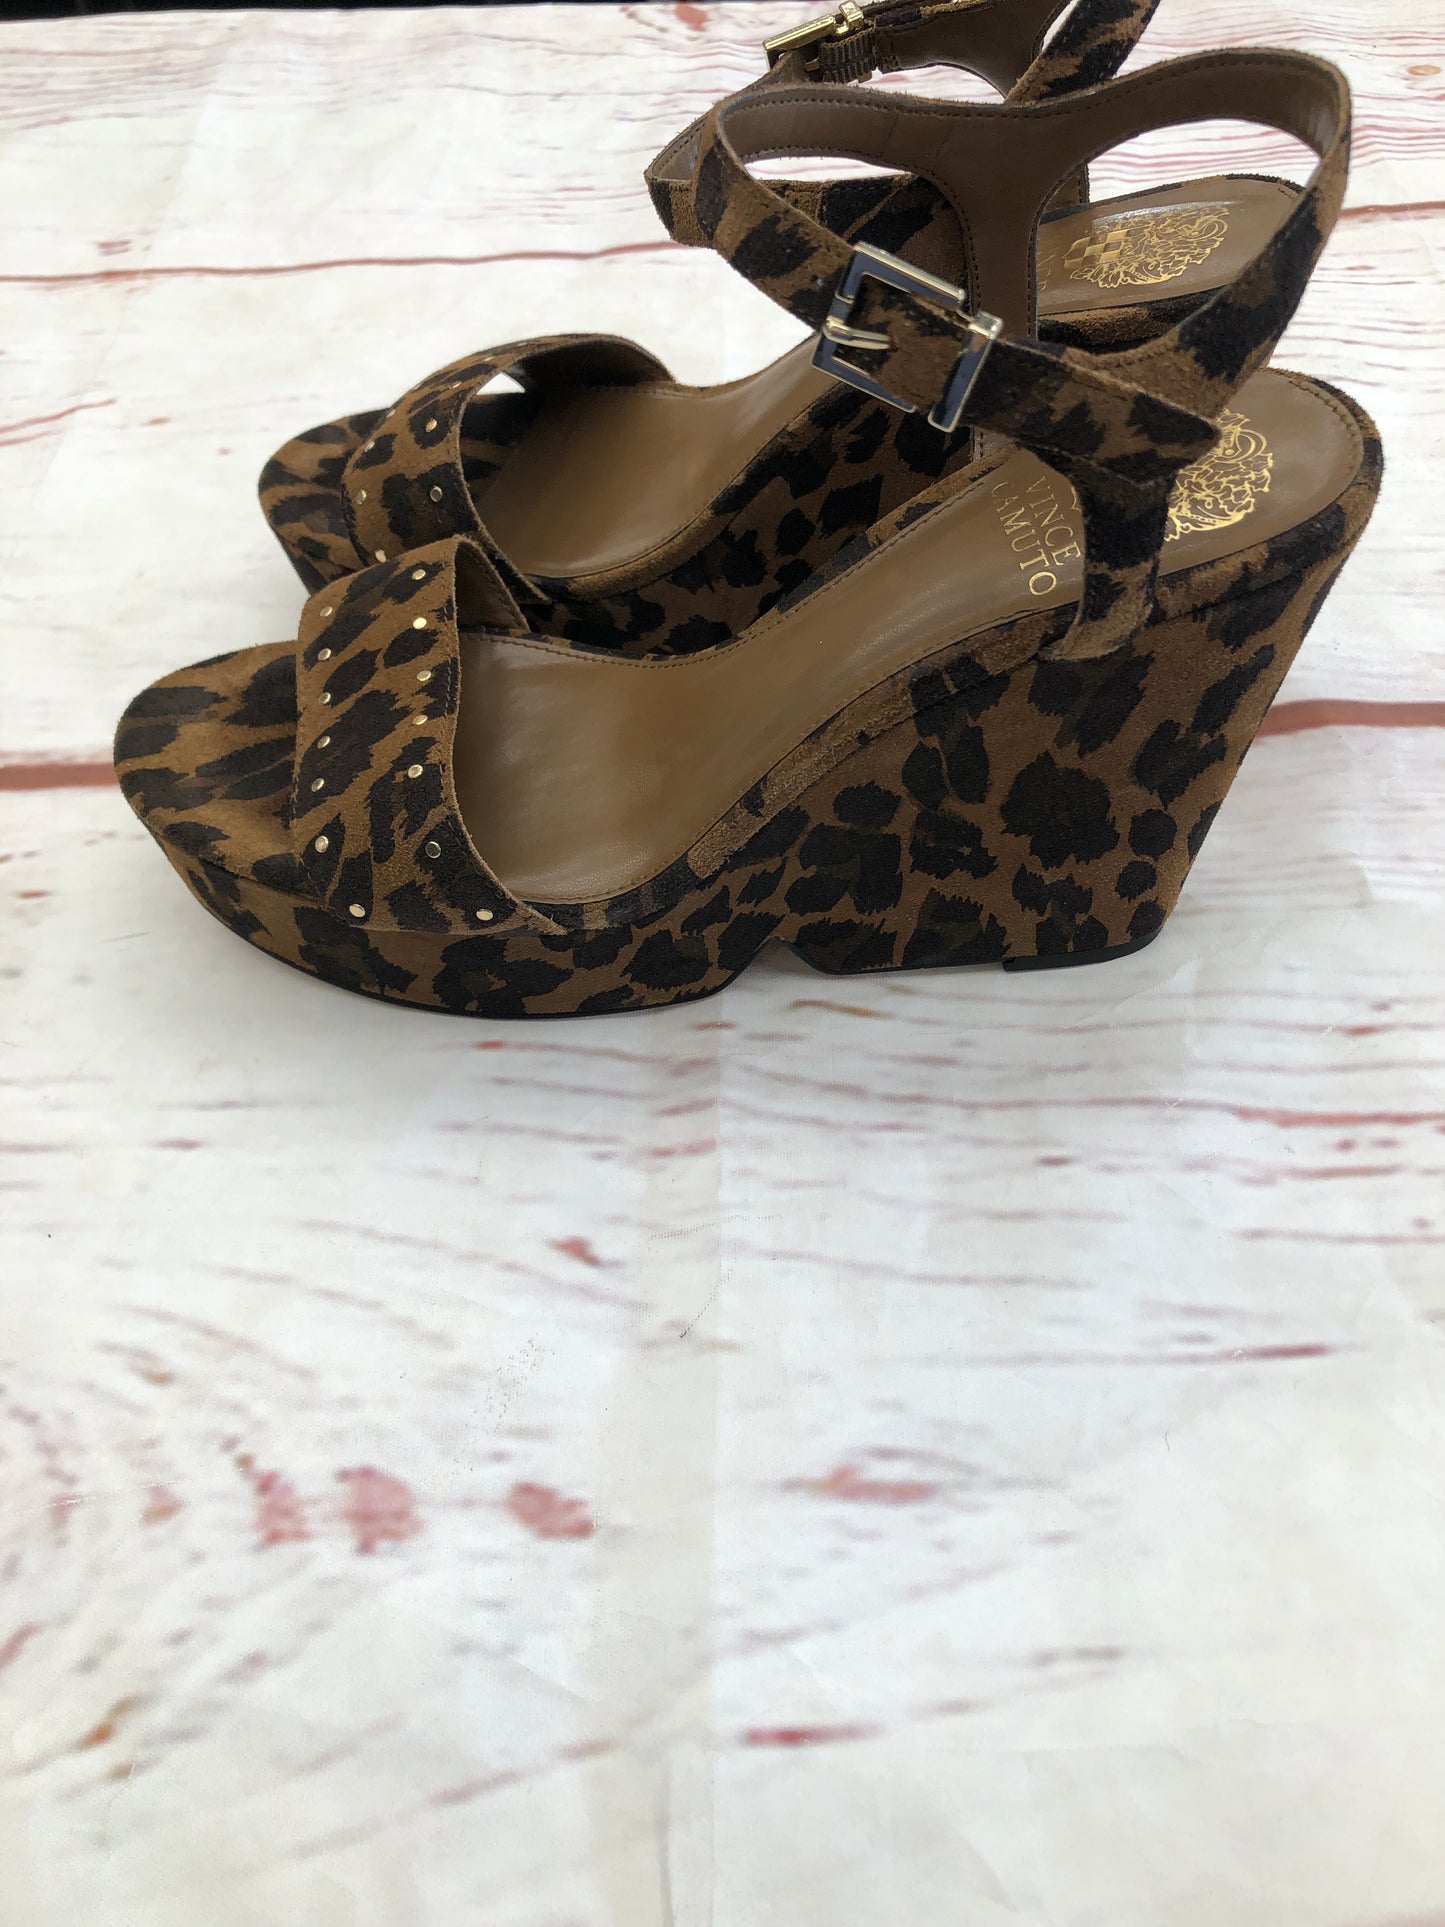 Sandals Heels Wedge By Vince Camuto  Size: 9